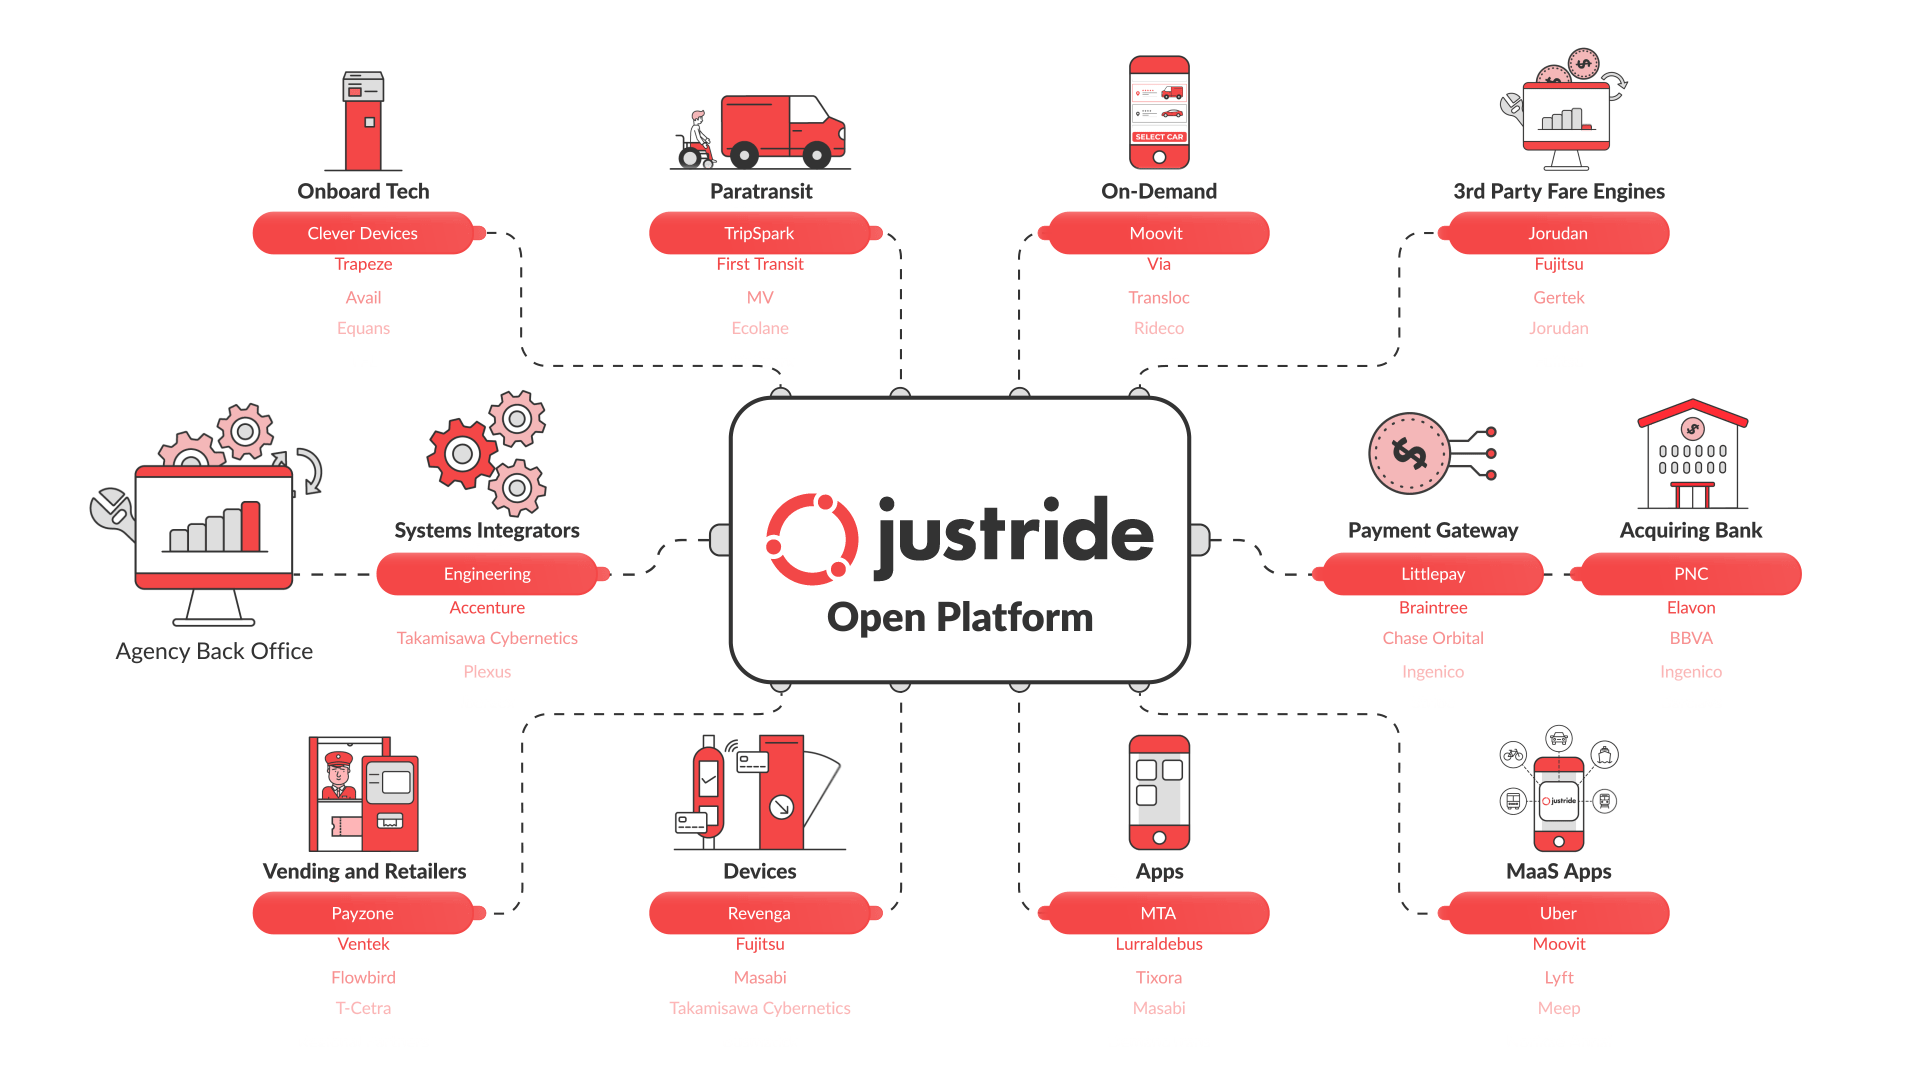 Justride Ready Partners